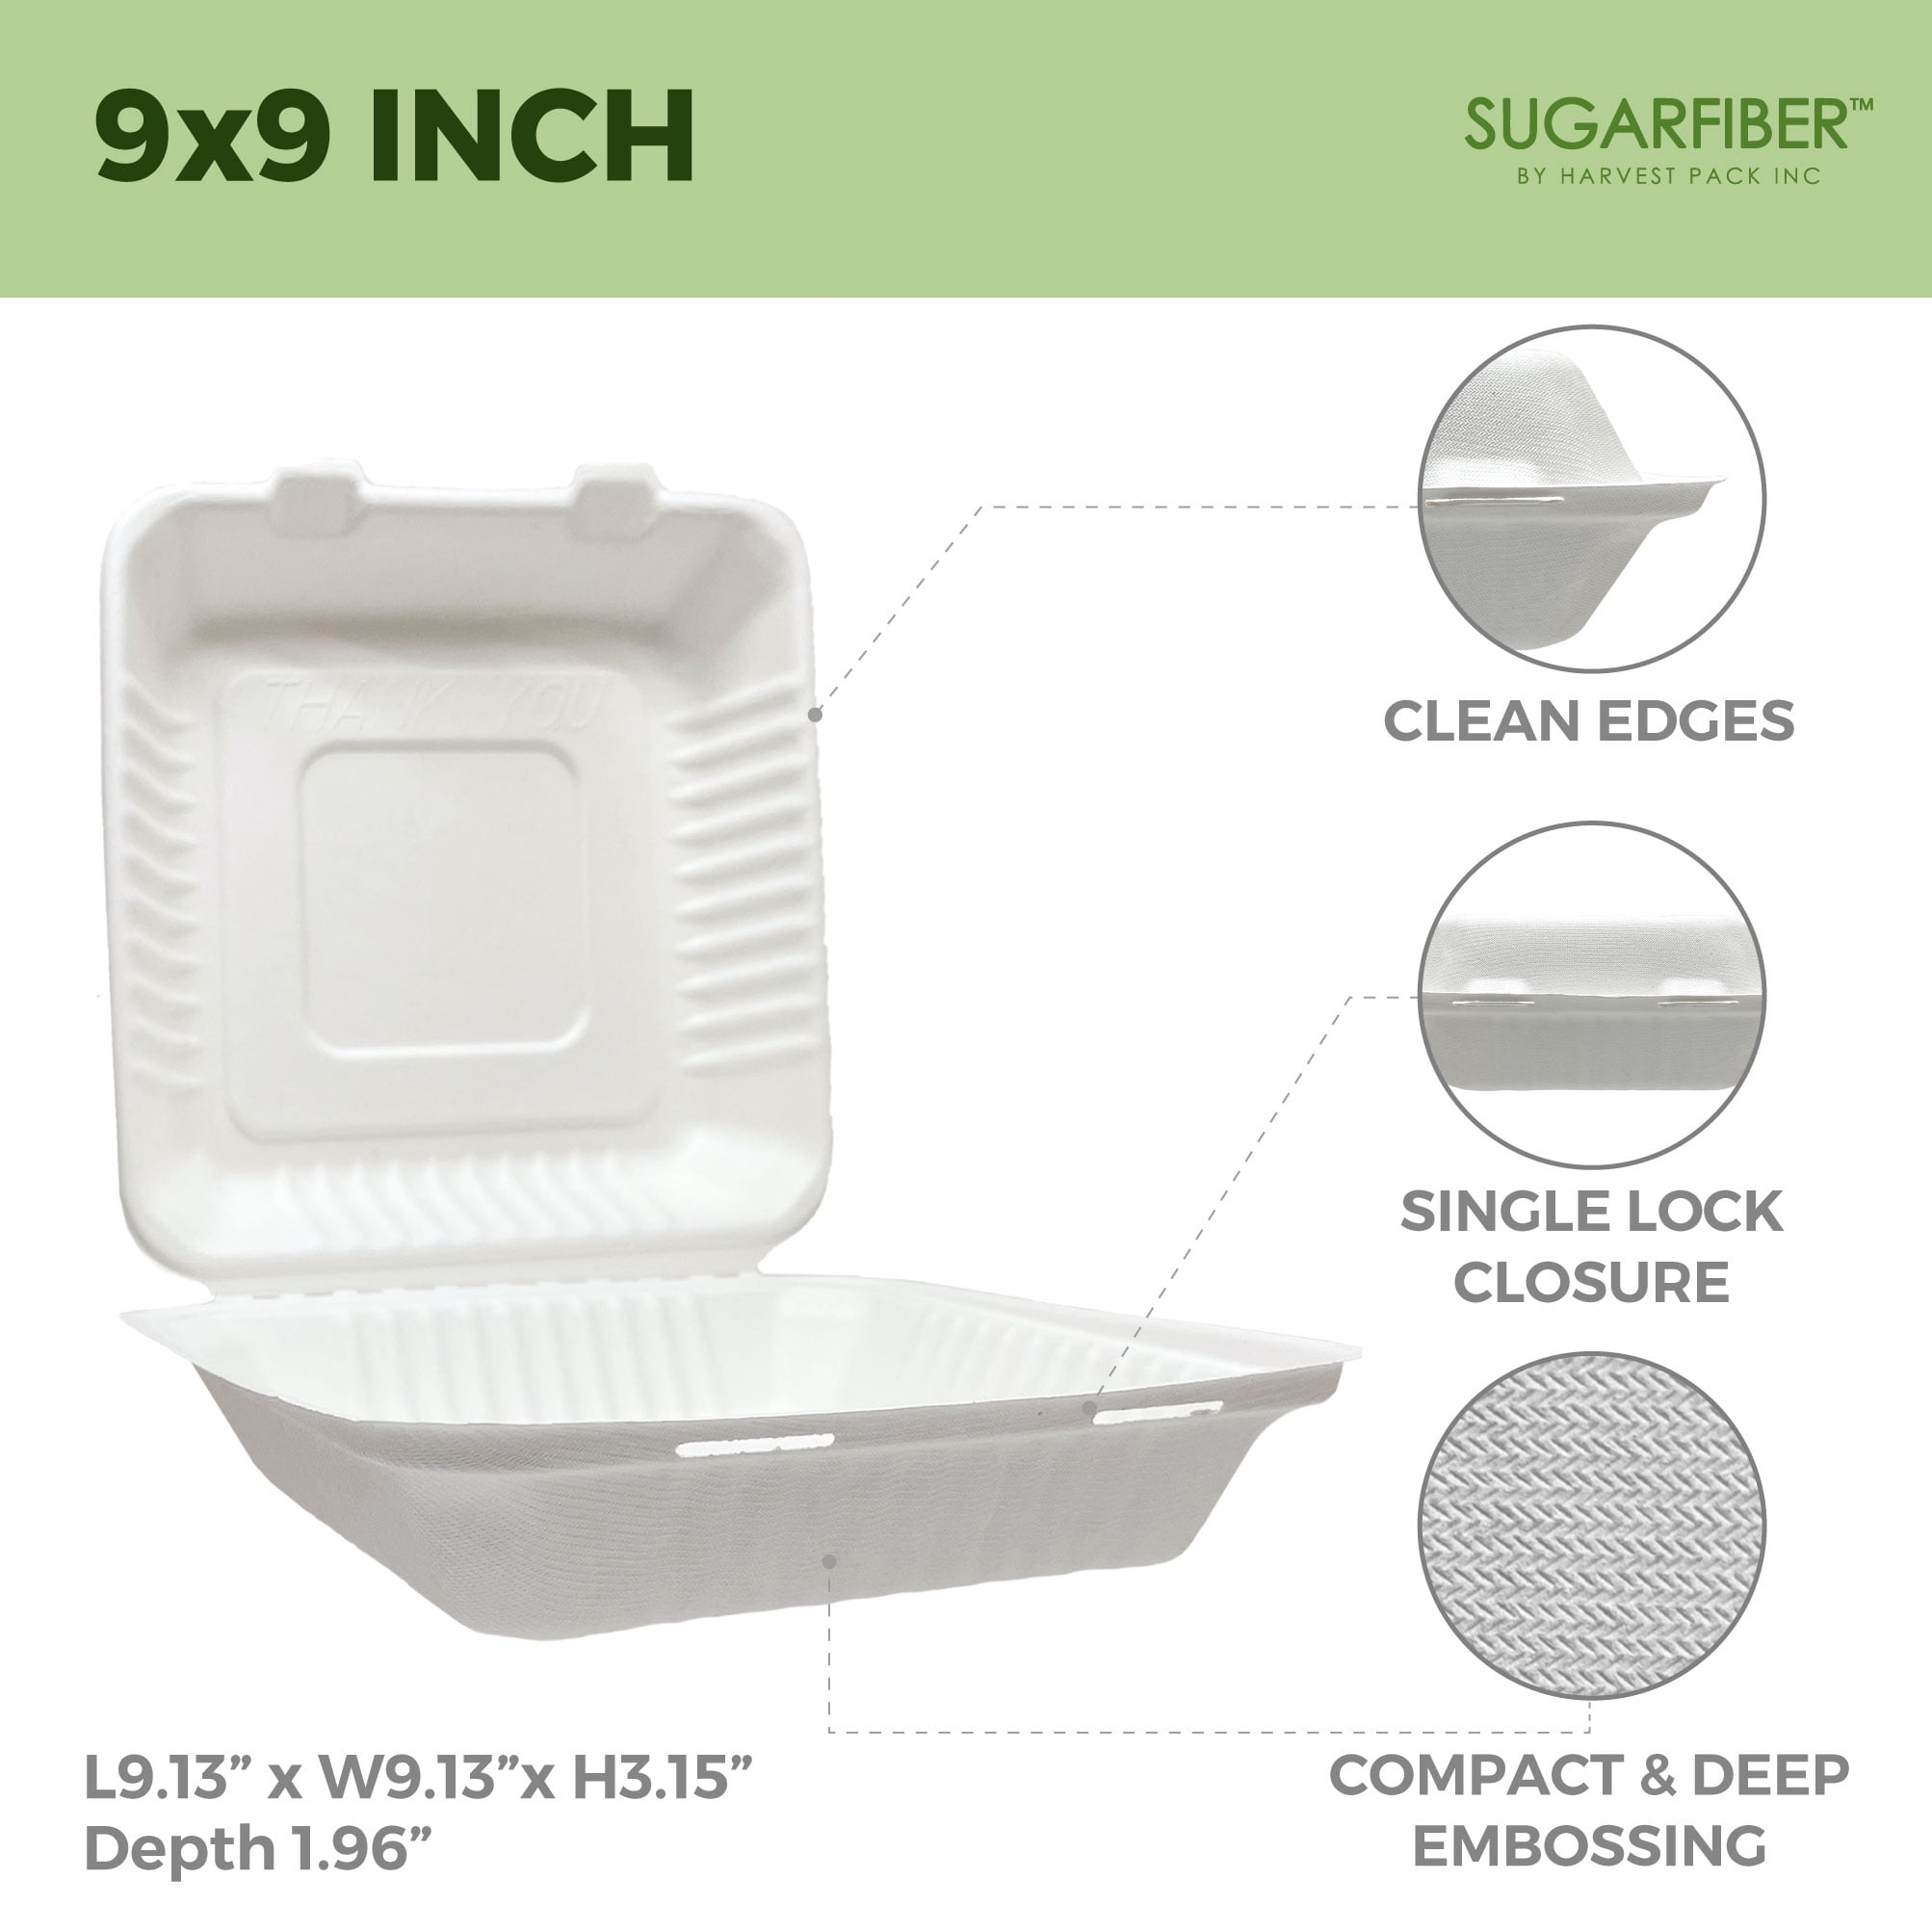 Buy Take Out Boxes Clamshell Hinged Biodegradable To Go Food Containers -  6x6 in. 125 Count. - White Now! Only $